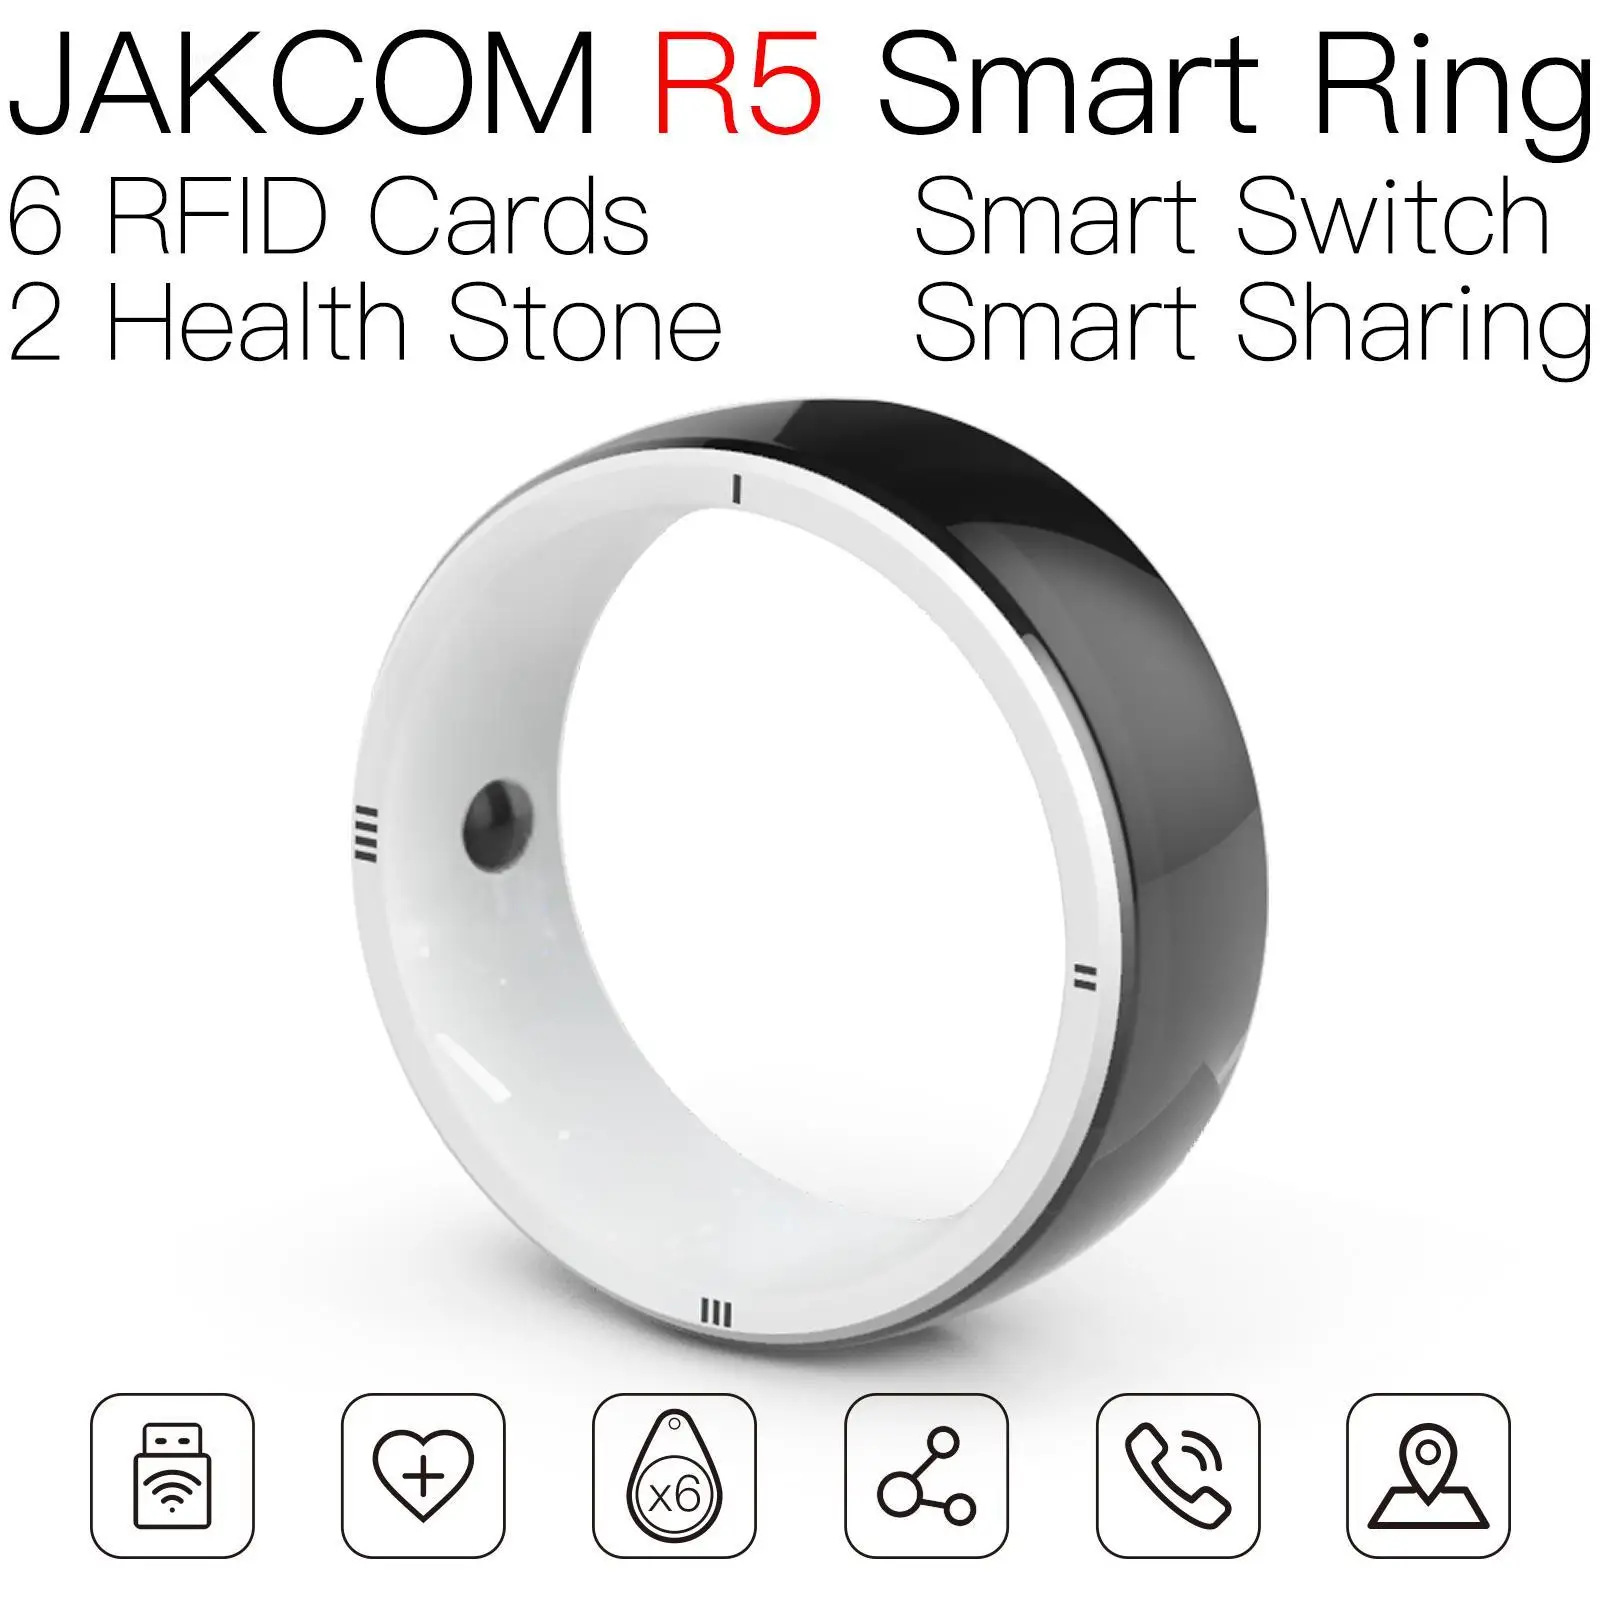 

JAKCOM R5 Smart Ring better than nfc coil coating rfid ic tag tags for switch antena uhf passive ntag215 plastic sticker token